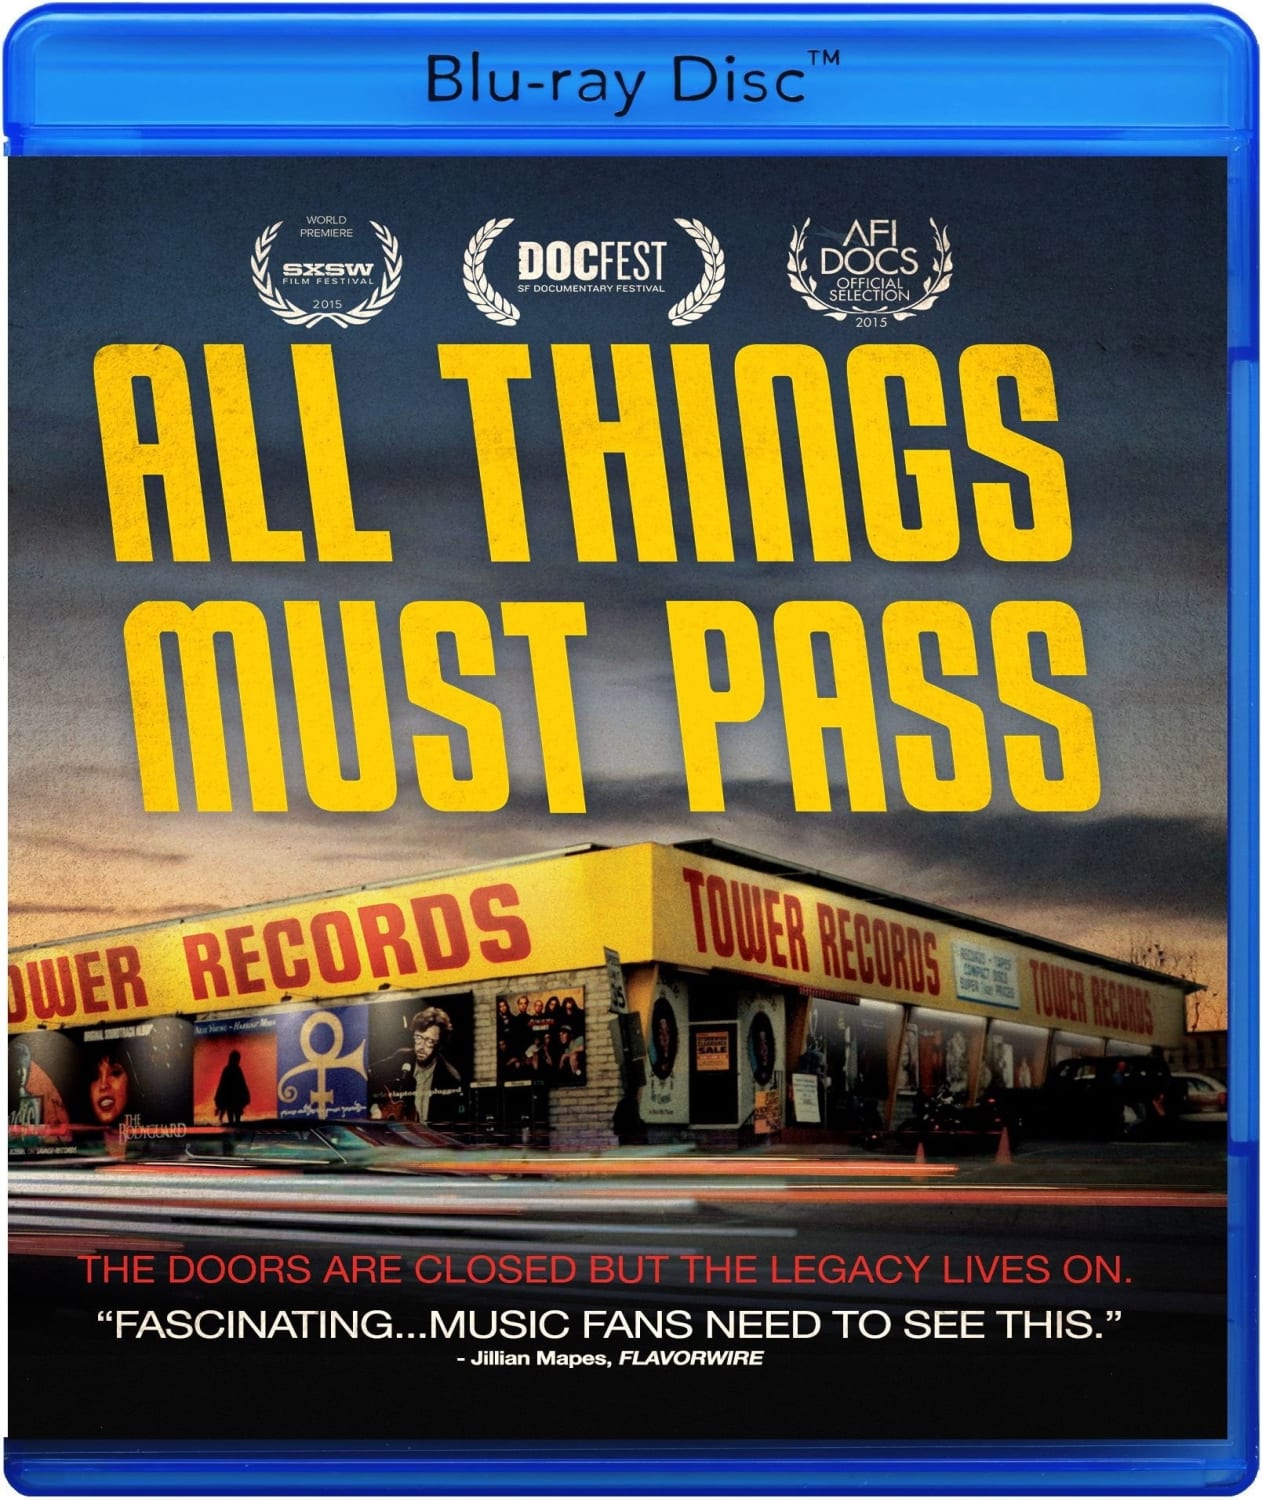 All Things Must Pass: The Rise and Fall of Tower Records (Blu-ray) on MovieShack